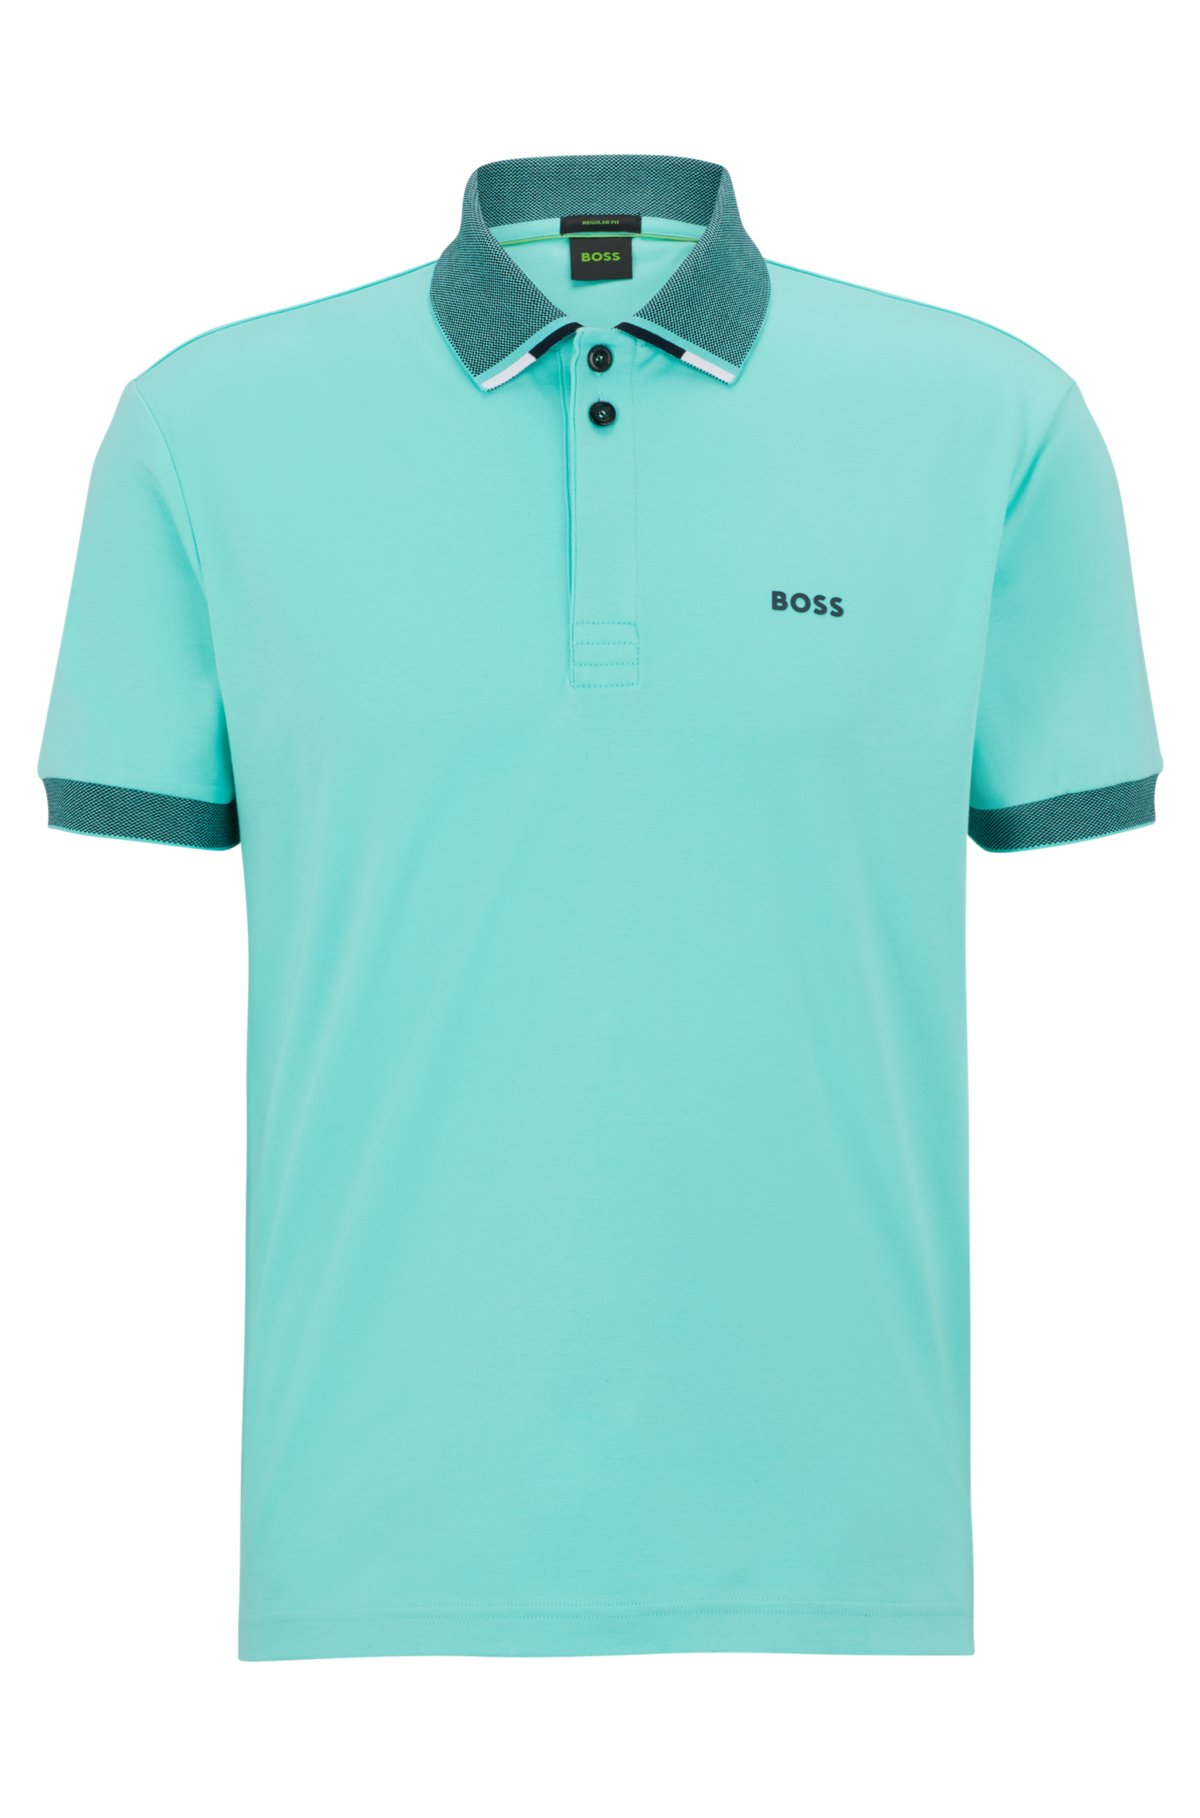 Fange Ødelægge Moden BOSS - Interlock-cotton polo shirt with structured collar and logo